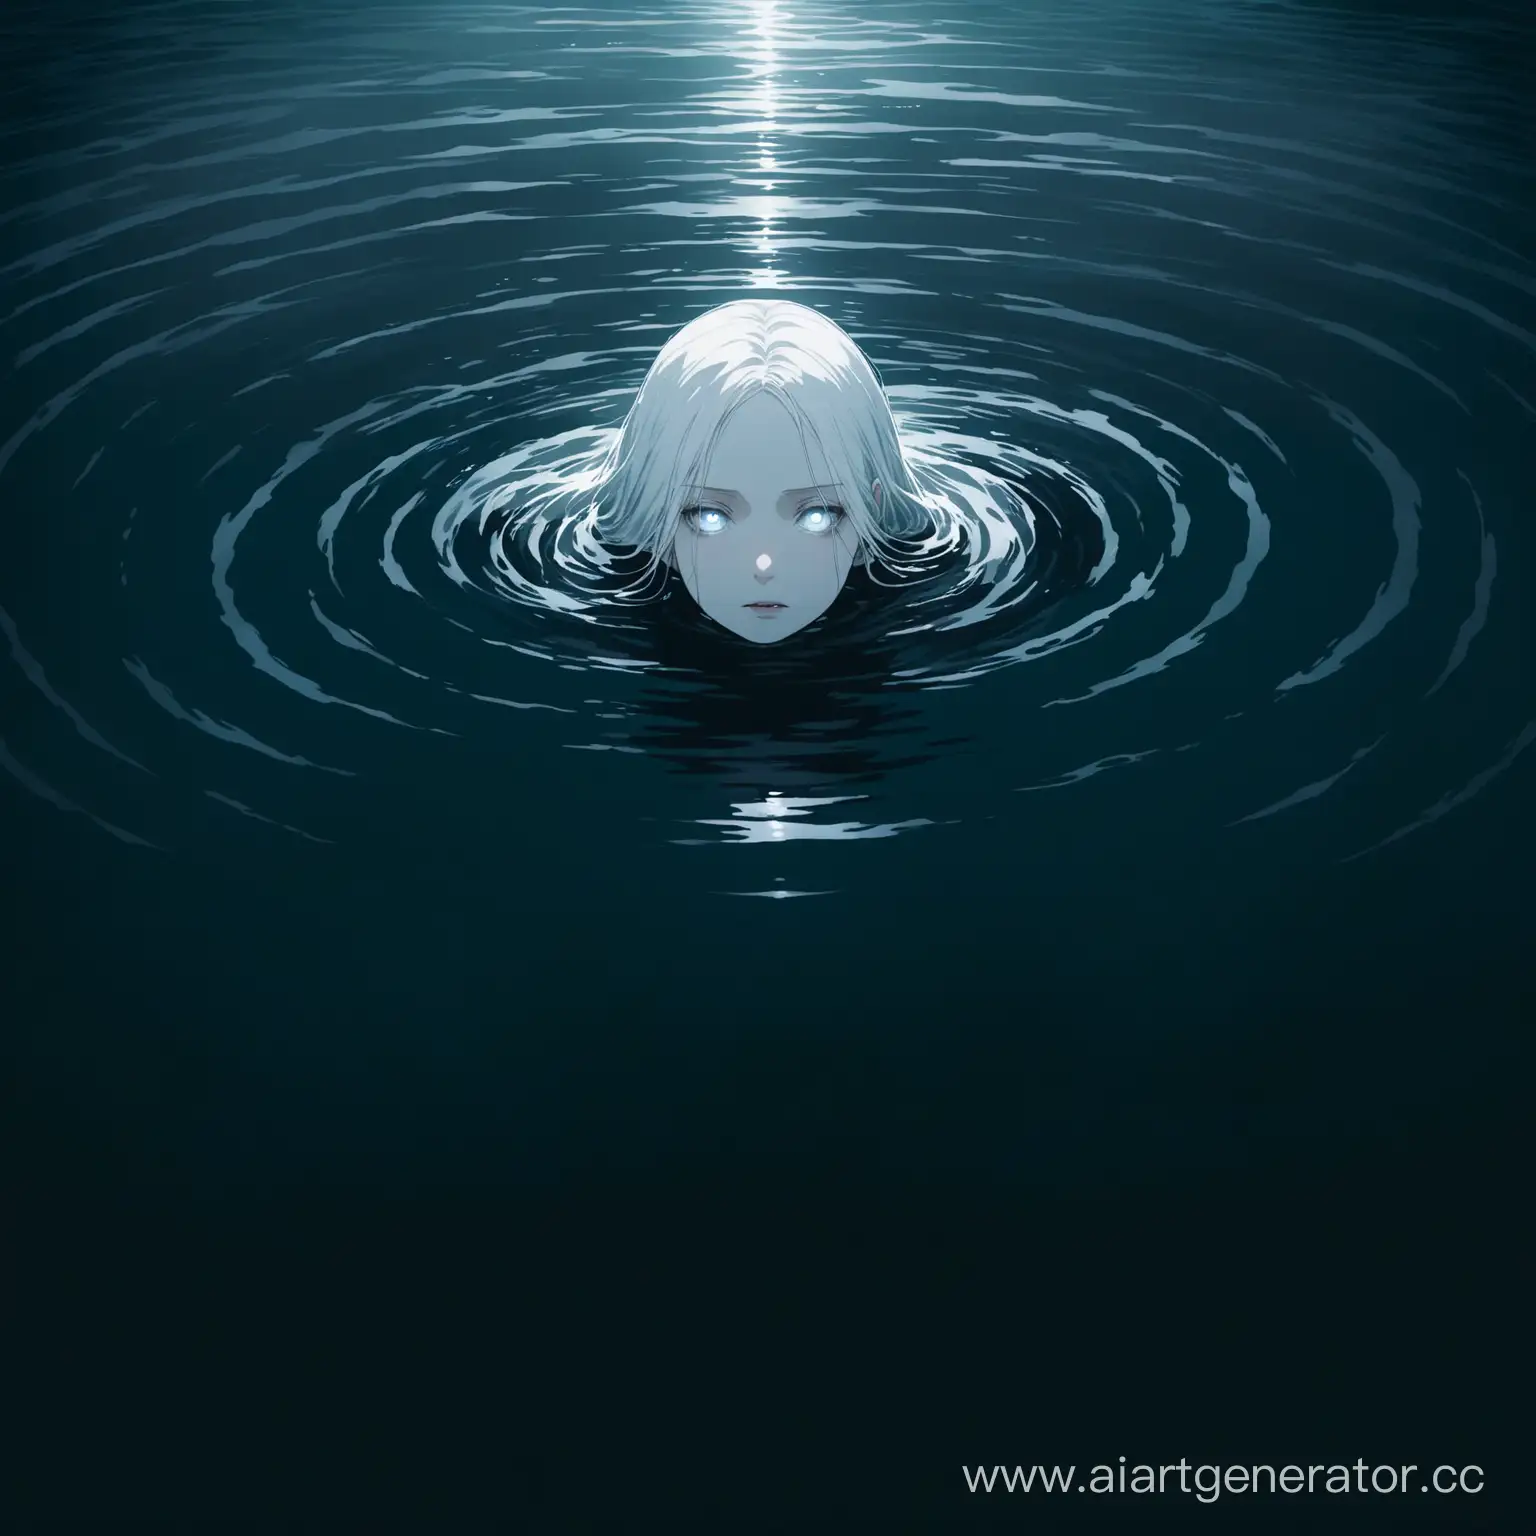 Ethereal-Woman-Emerging-from-Dark-Waters-Mysterious-Night-Scene